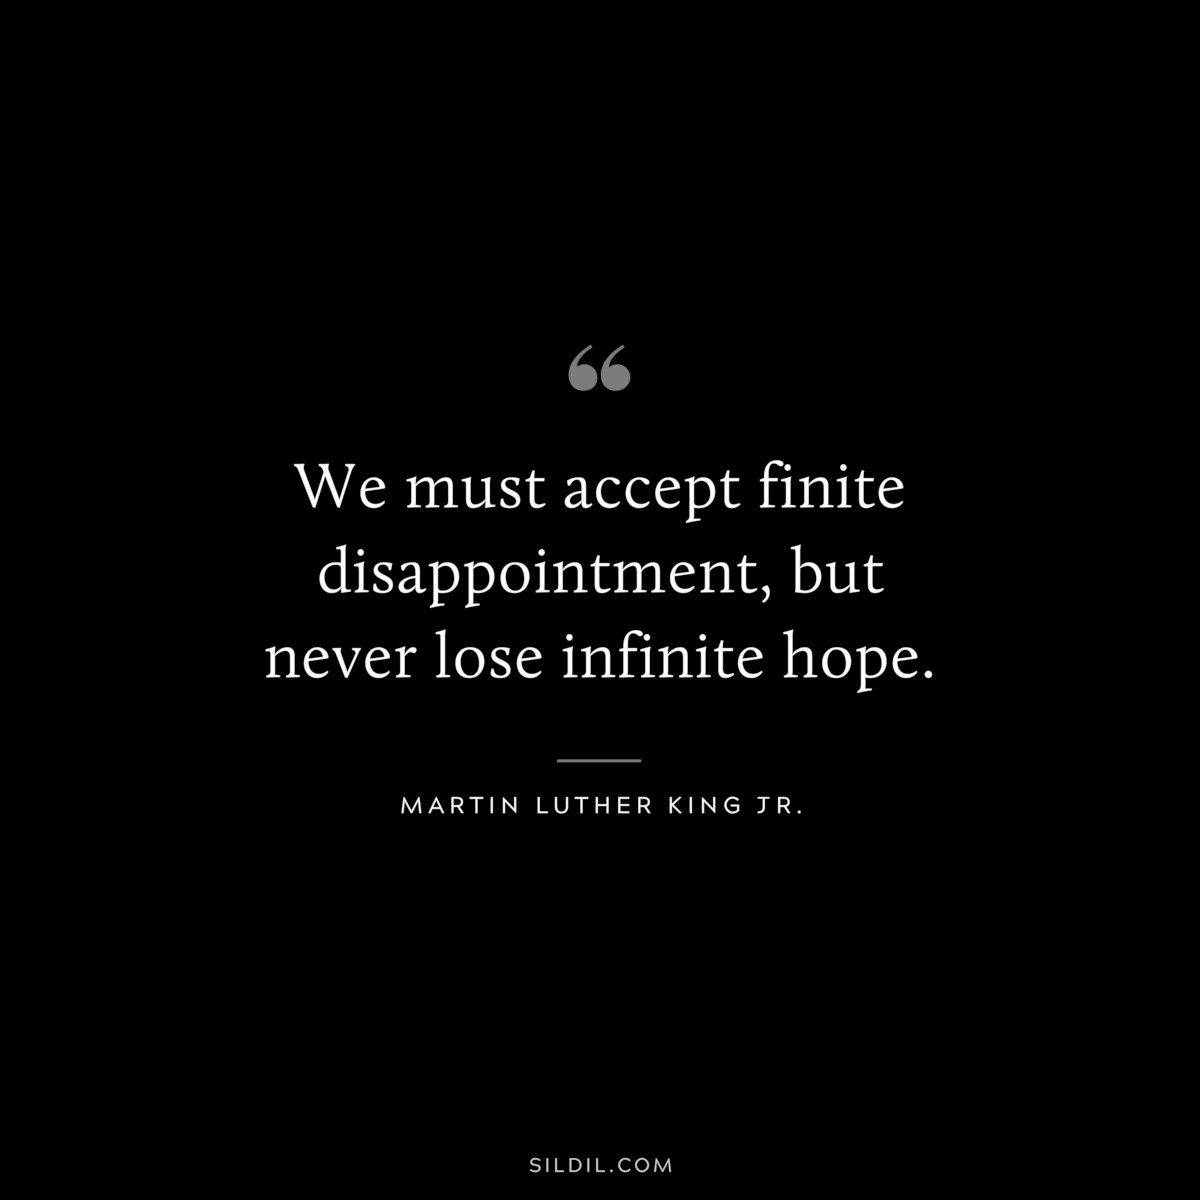 We must accept finite disappointment, but never lose infinite hope. ― Martin Luther King Jr.